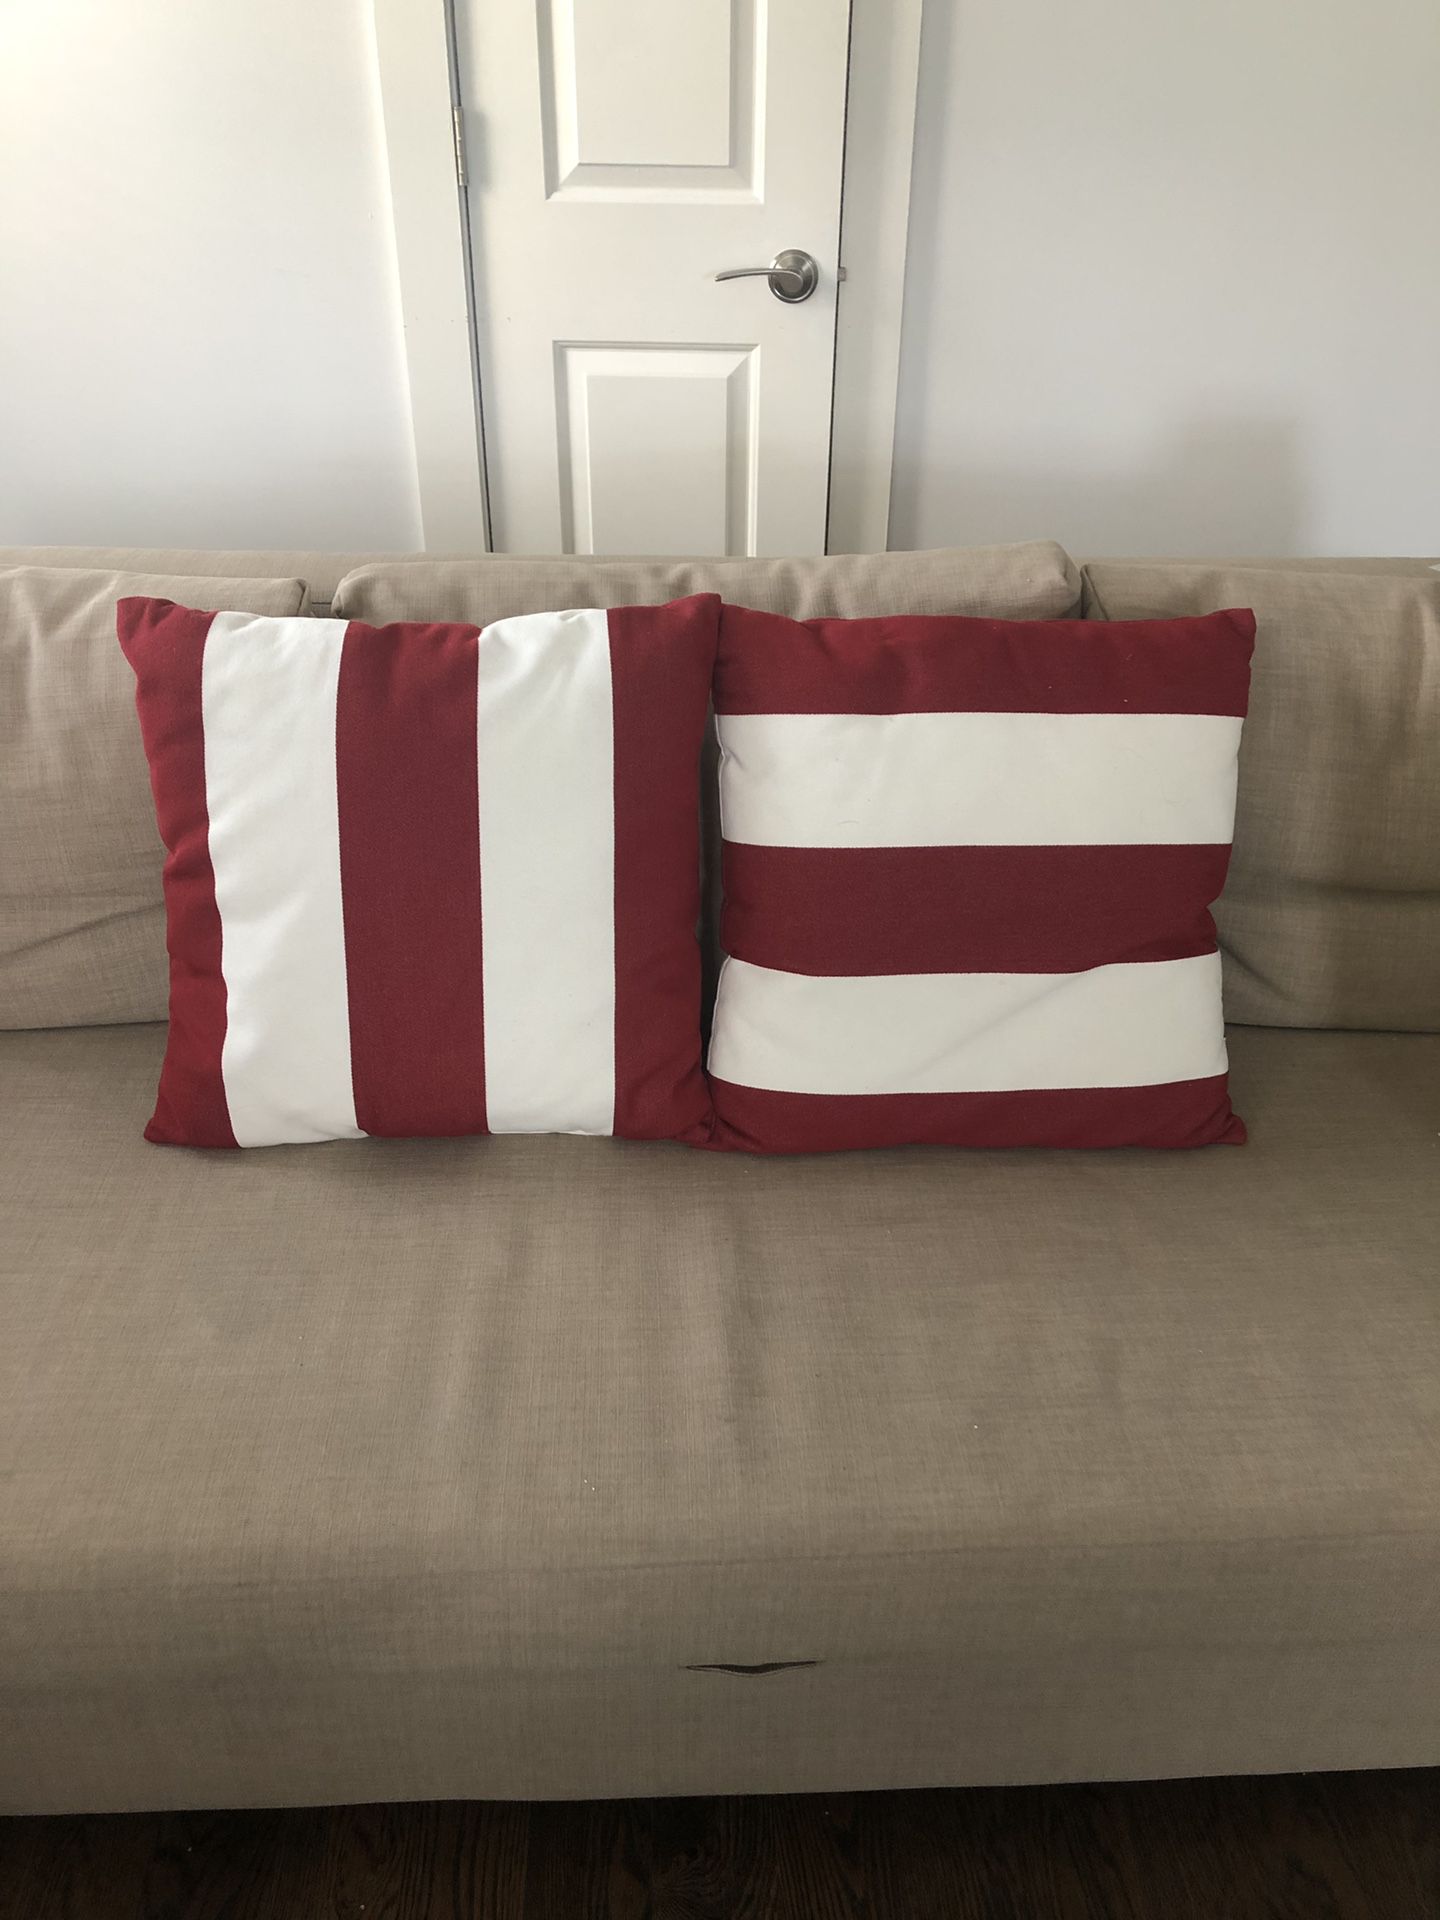 Red and white decorative pillows